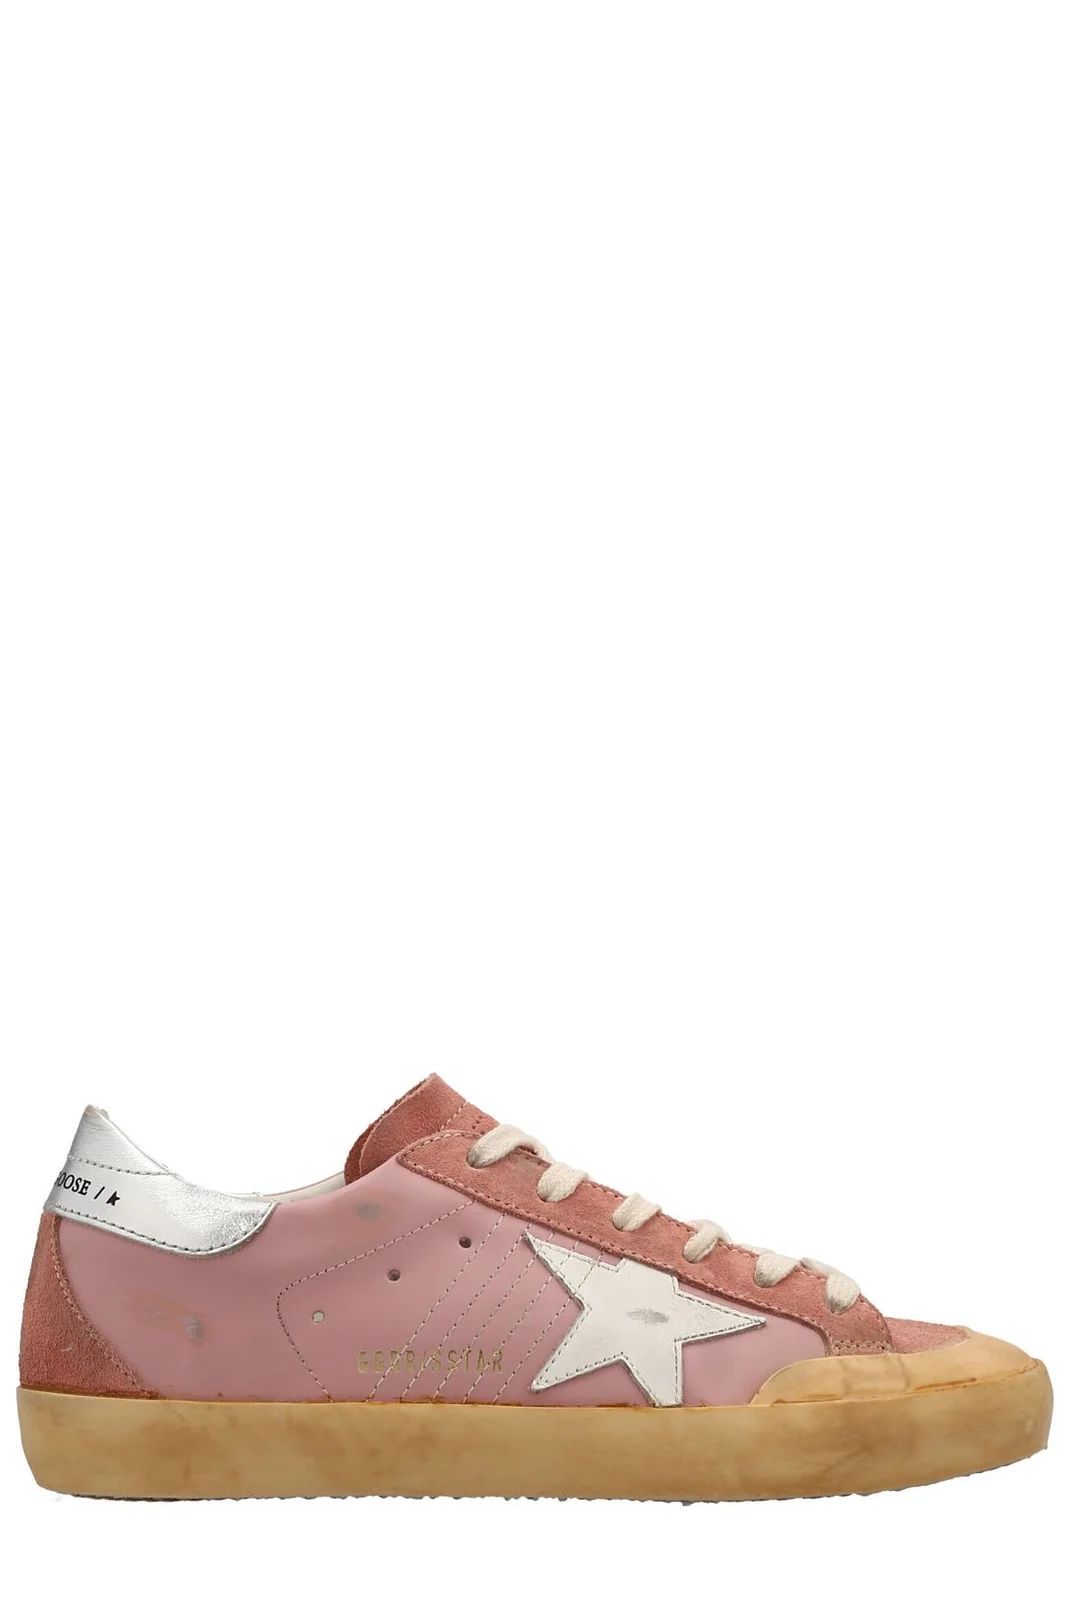 Golden Goose Deluxe Brand Logo Patch Lace-Up Sneakers | Cettire Global